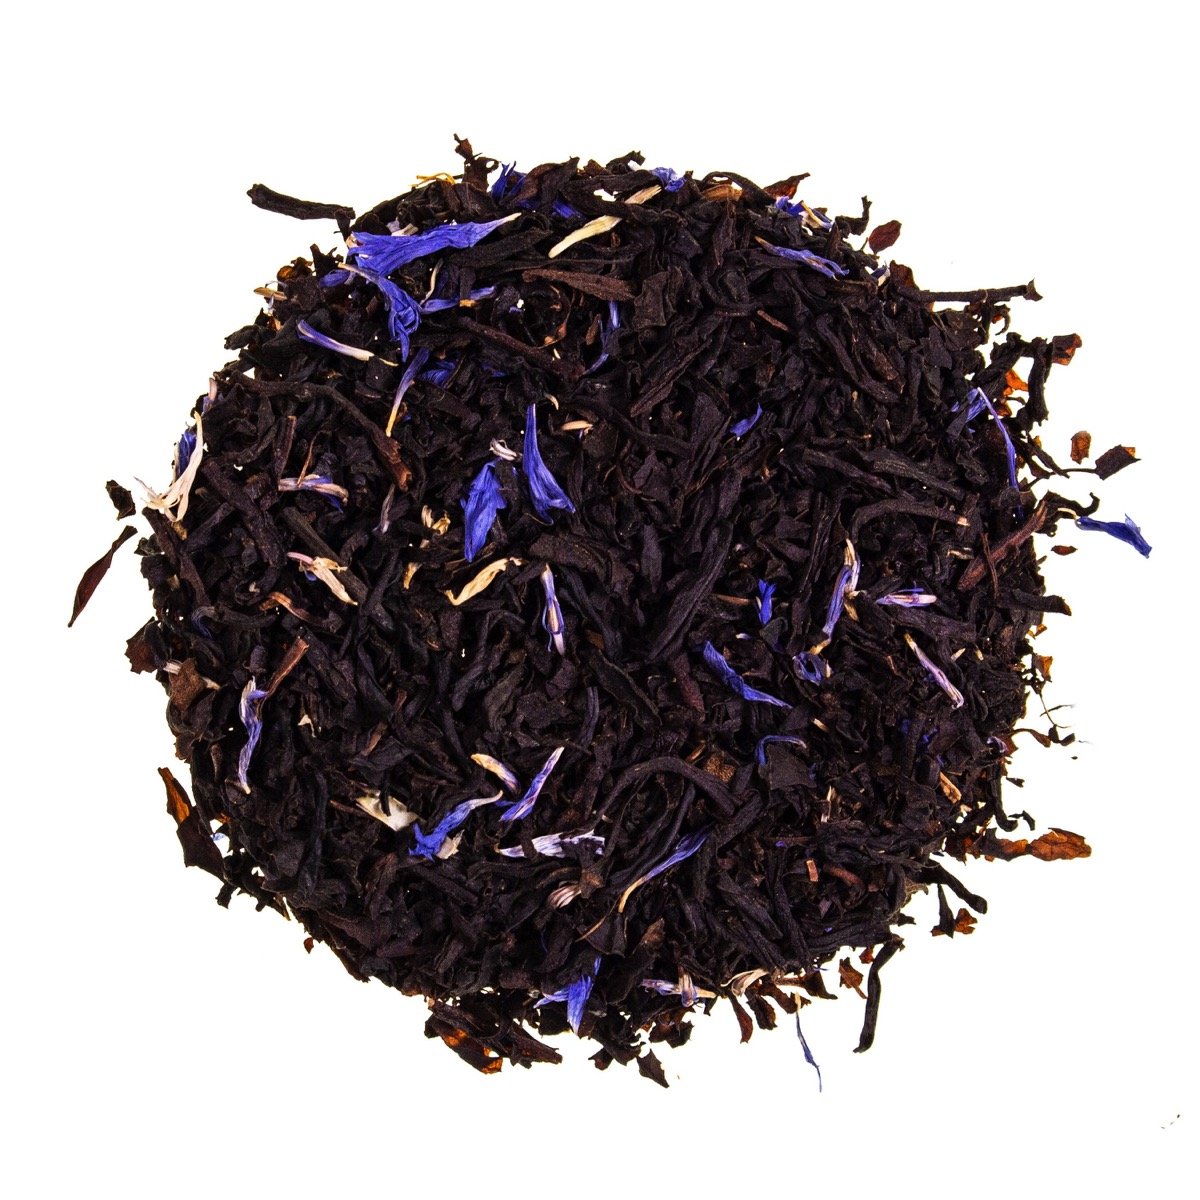 This award winning Arctic Fire tea really packs a punch.  Features a cool minty flavour with subtle undertones of fruit that will soothe your senses and invigorate your mind. The perfect, refreshing mint tea for a hot summer’s afternoon.  Contains: Loose Leaf tea, Black tea, flavour & blue cornflowers.  Best selling Australian tea